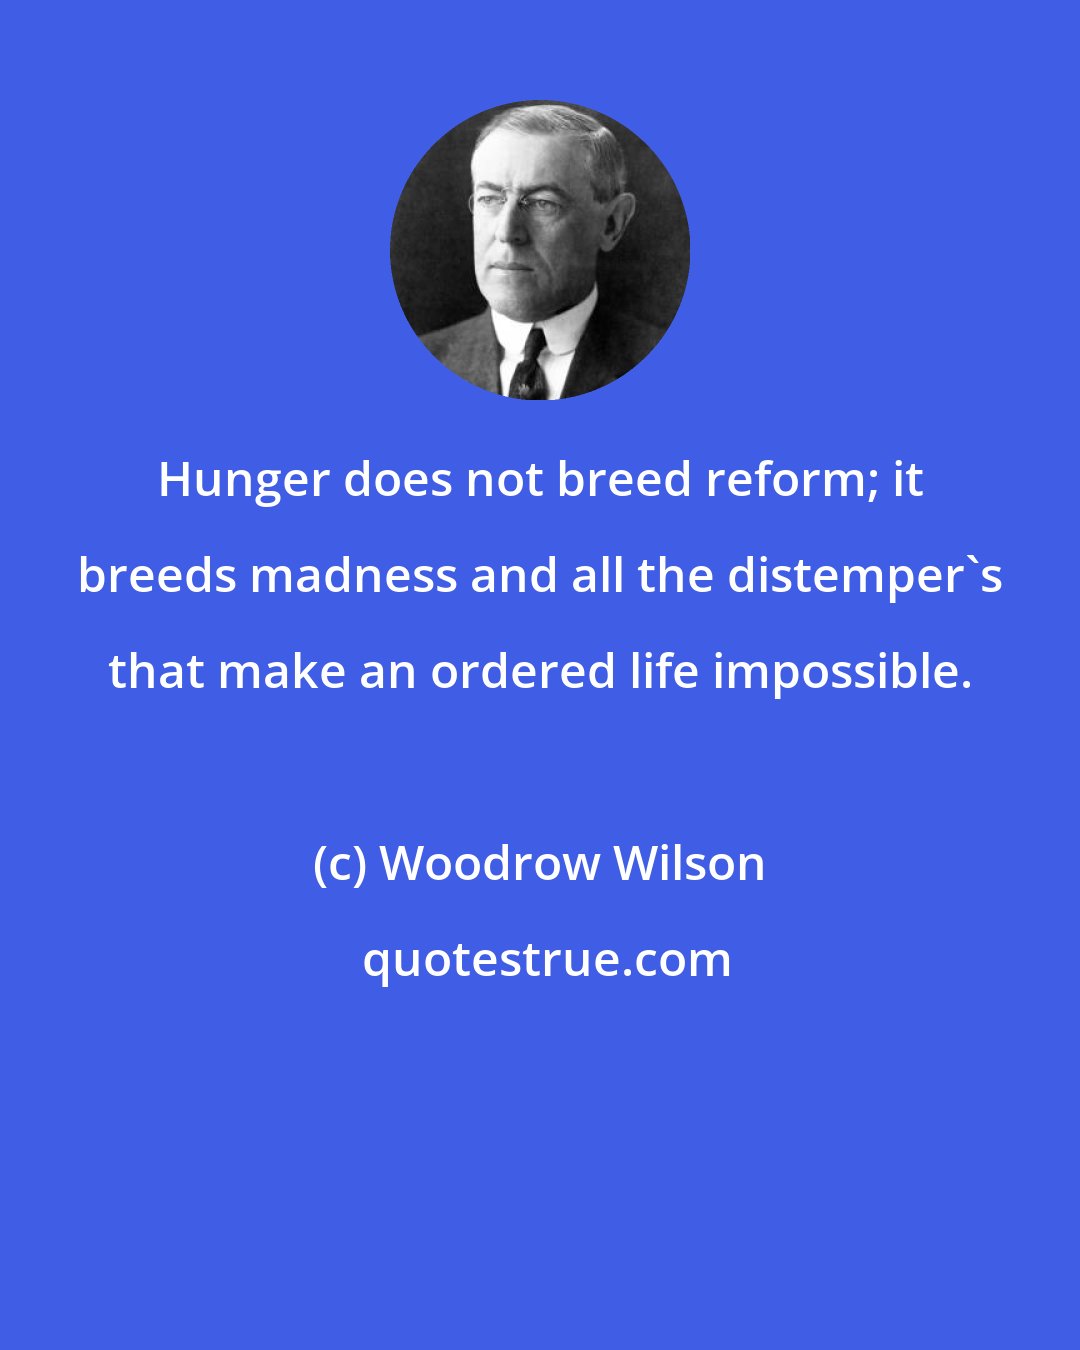 Woodrow Wilson: Hunger does not breed reform; it breeds madness and all the distemper's that make an ordered life impossible.